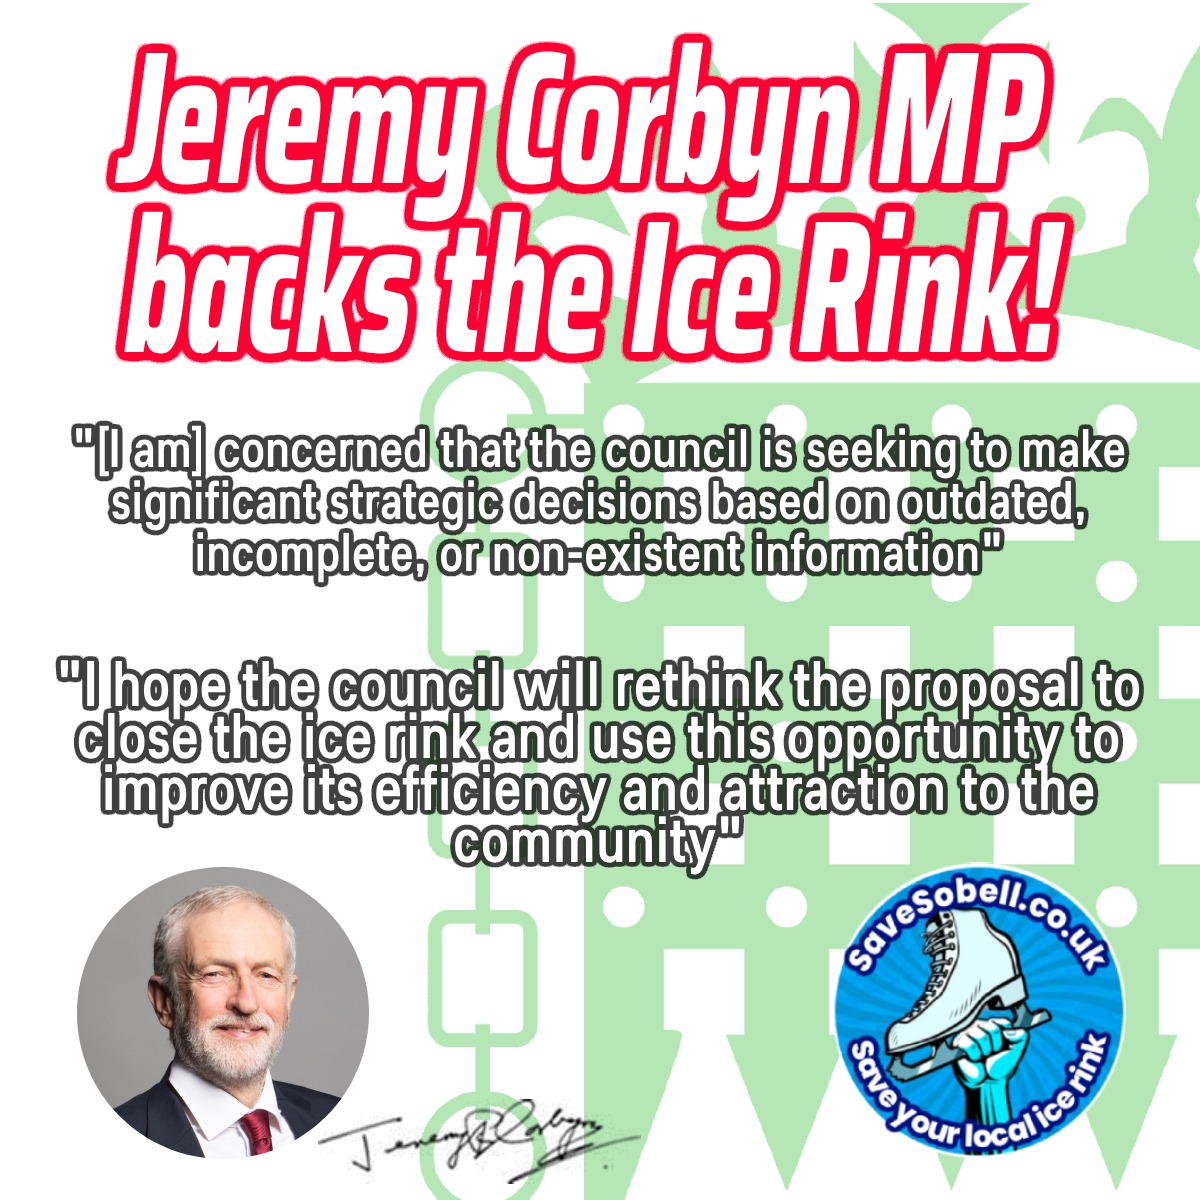 @JeremyCorbyn supports the reinstatement of the Sobell ice rink! LAST CHANCE TO HAVE YOUR SAY, deadline this FRIDAY! Check out our guidance here - savesobell.co.uk/how-to-fill-in… #savesobell #islington #sobell